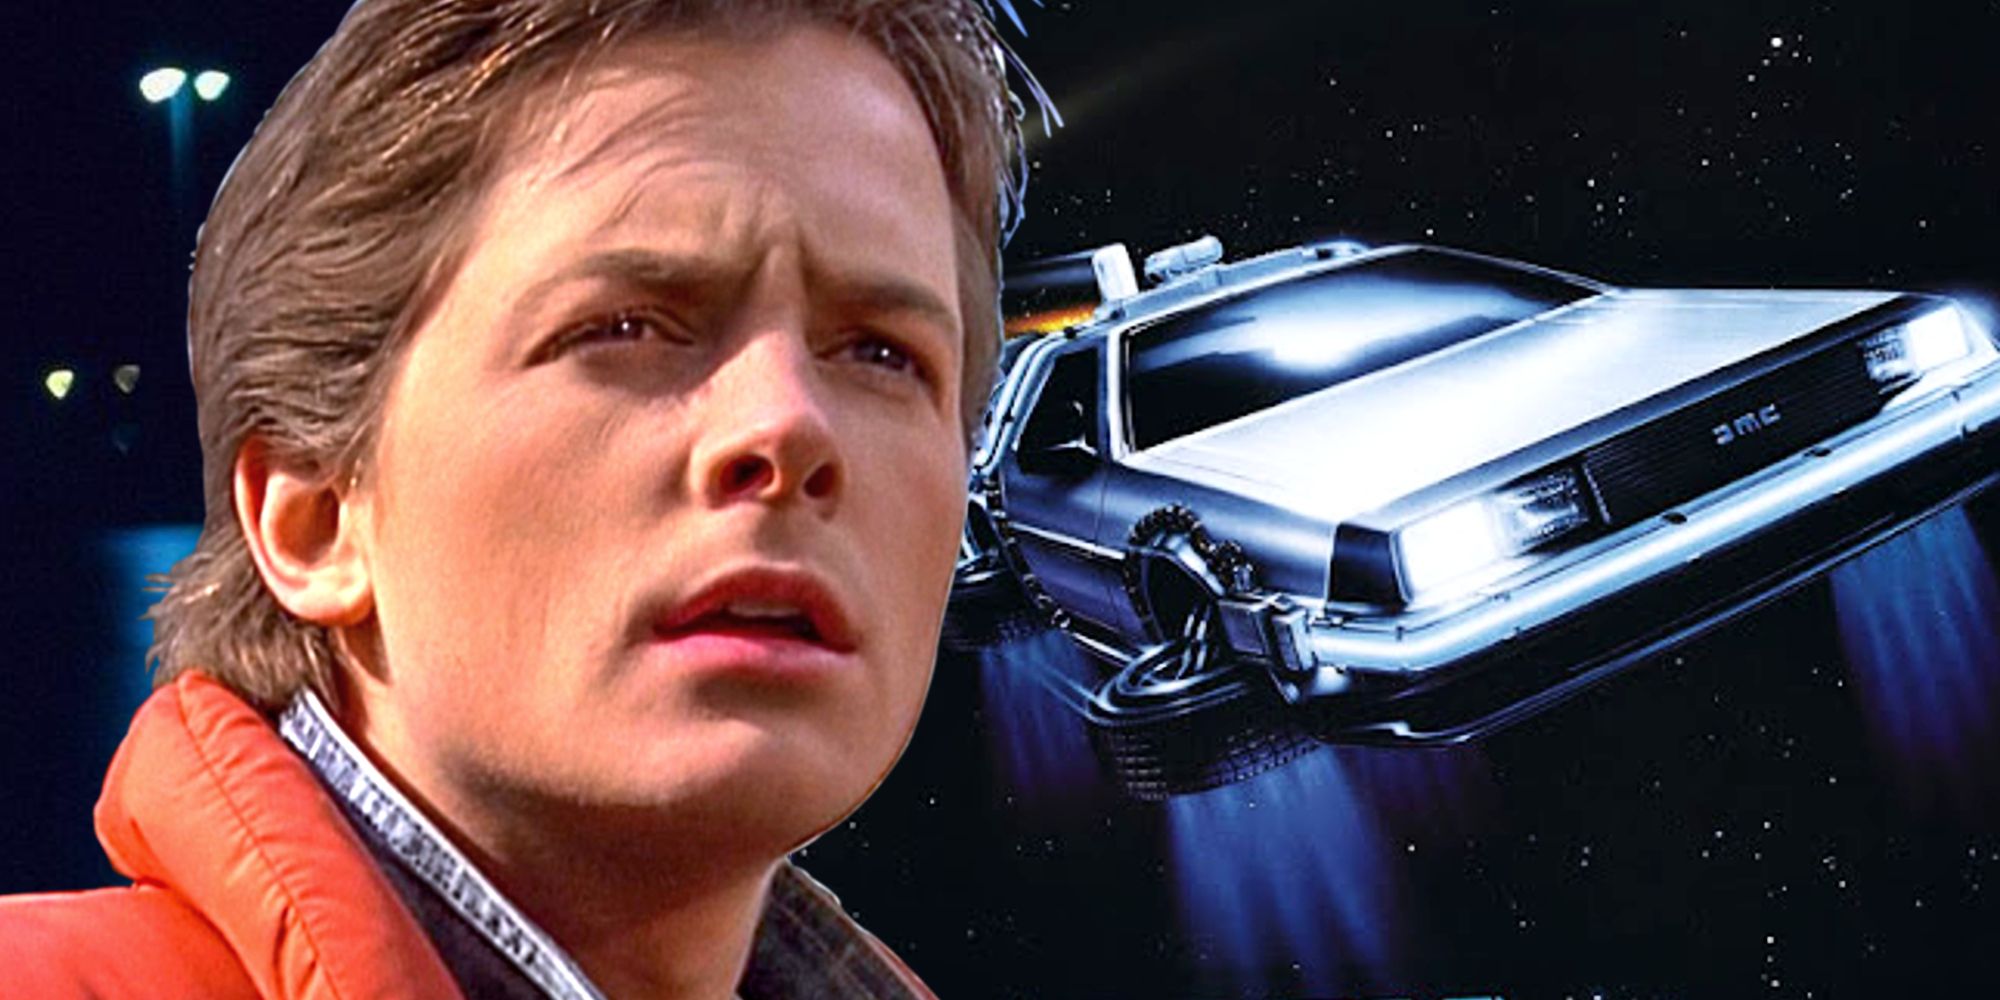 Marty McFly and the DeLorean in Back to the Future